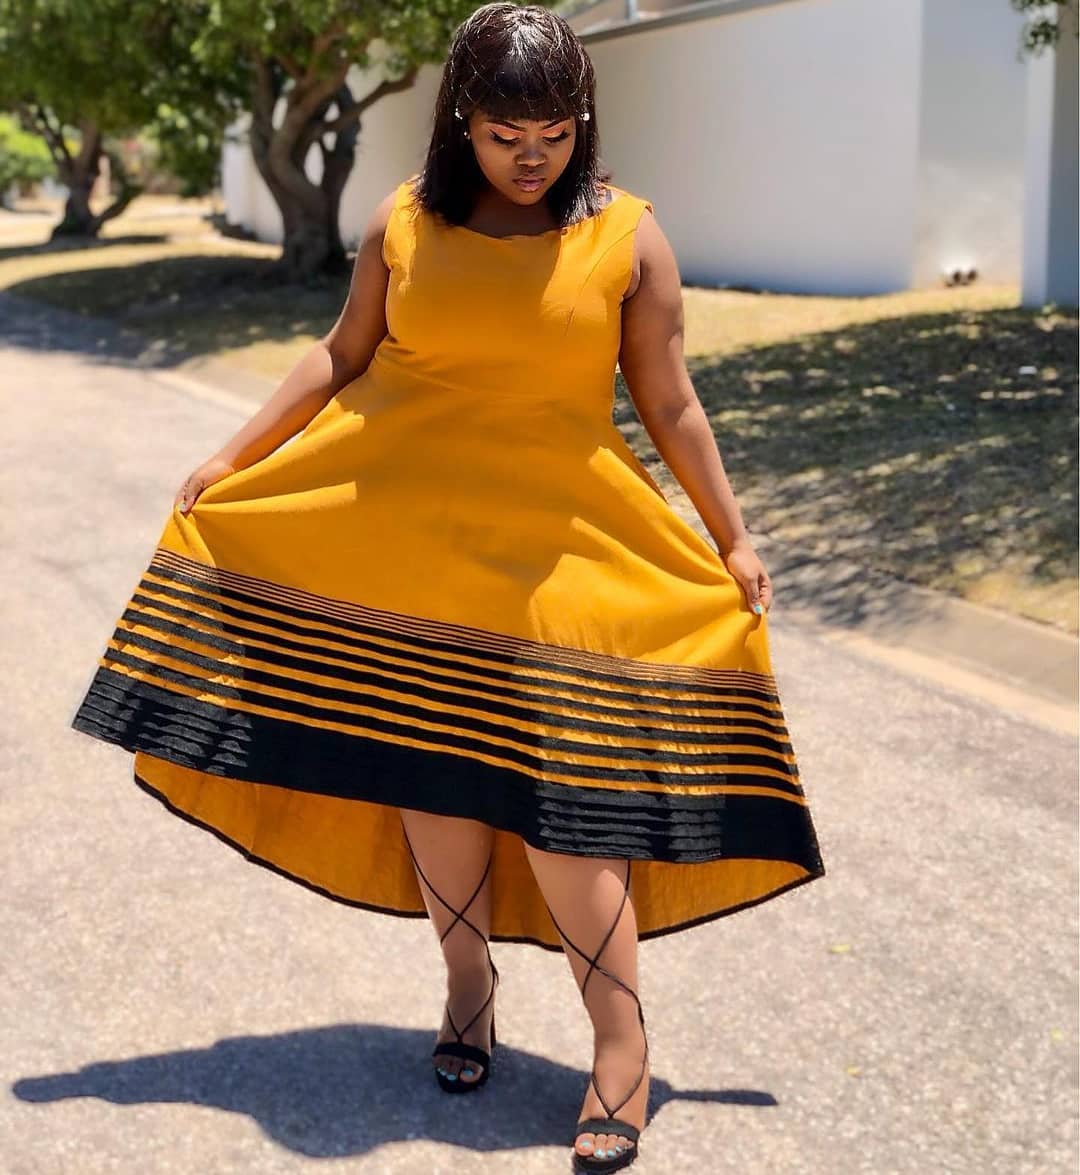 Amazing Xhosa Clothing For African Women - Dresses Designs 26